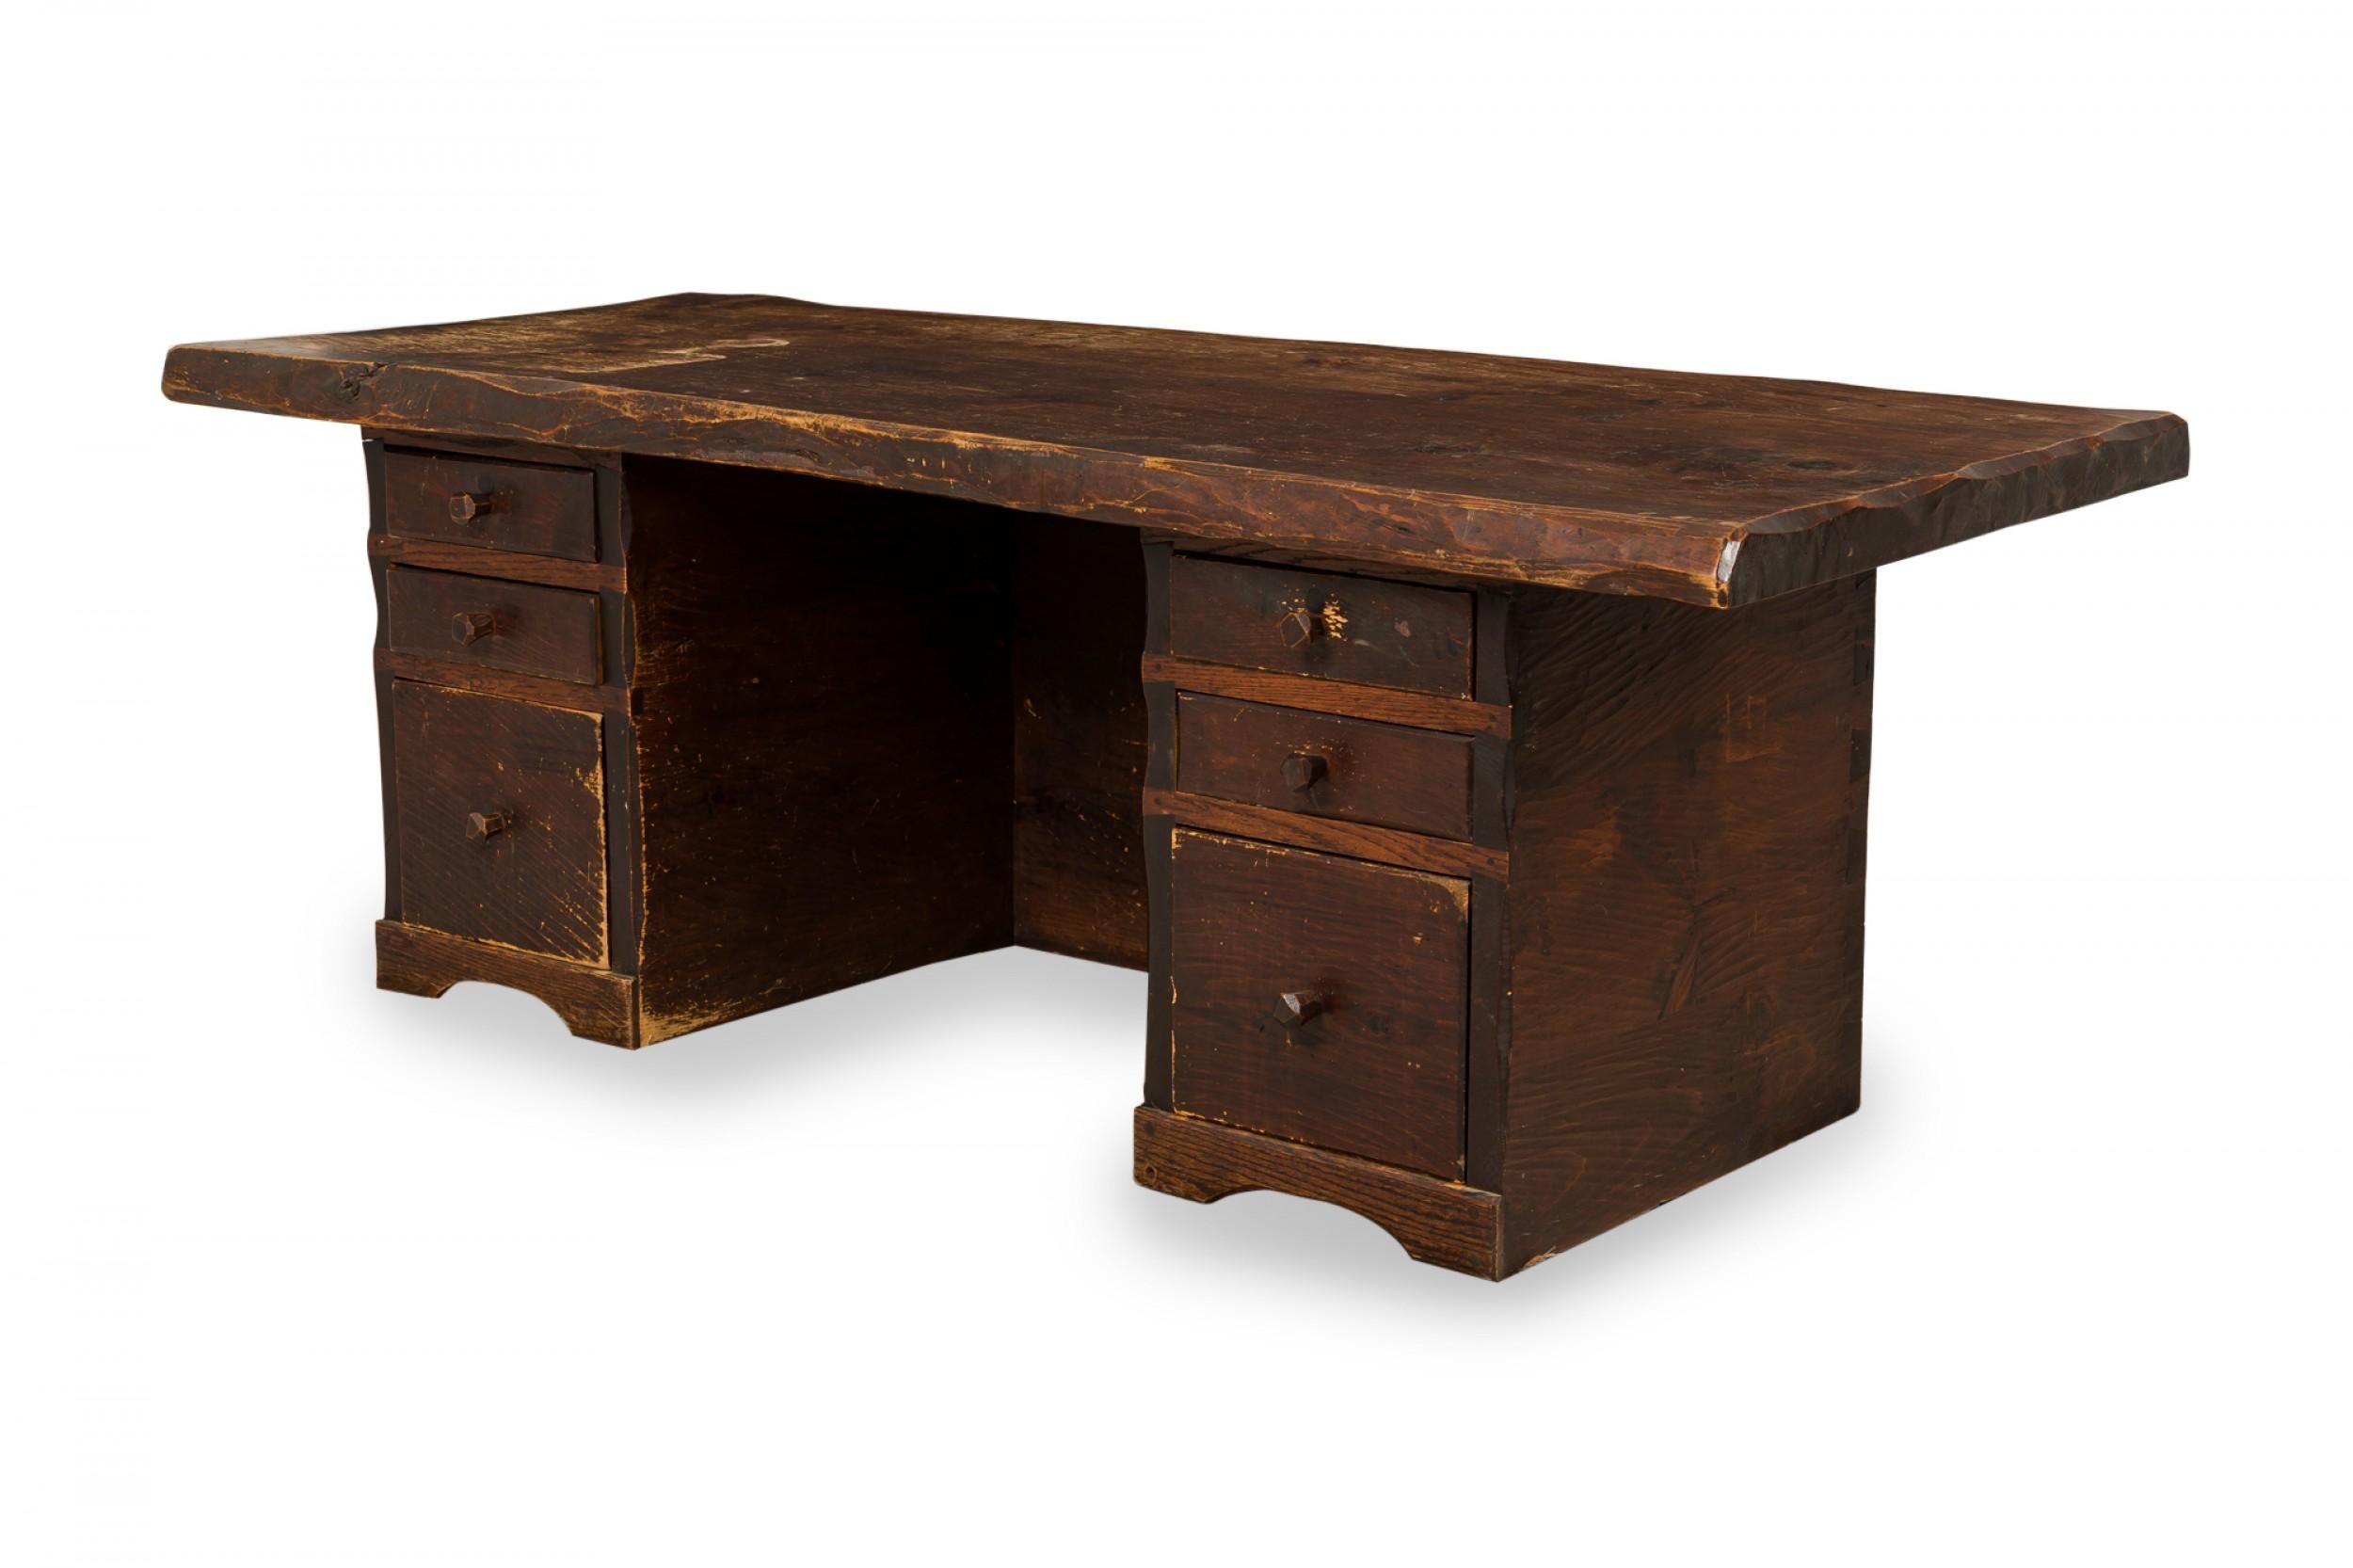 Rustic Adirondack (2nd quarter 20th Century) heavy wooden executive desk with a hewn solid wooden desktop supported by two pedestal bases, each containing three drawers with carved wooden drawer pulls and a front privacy panel connected with tusk